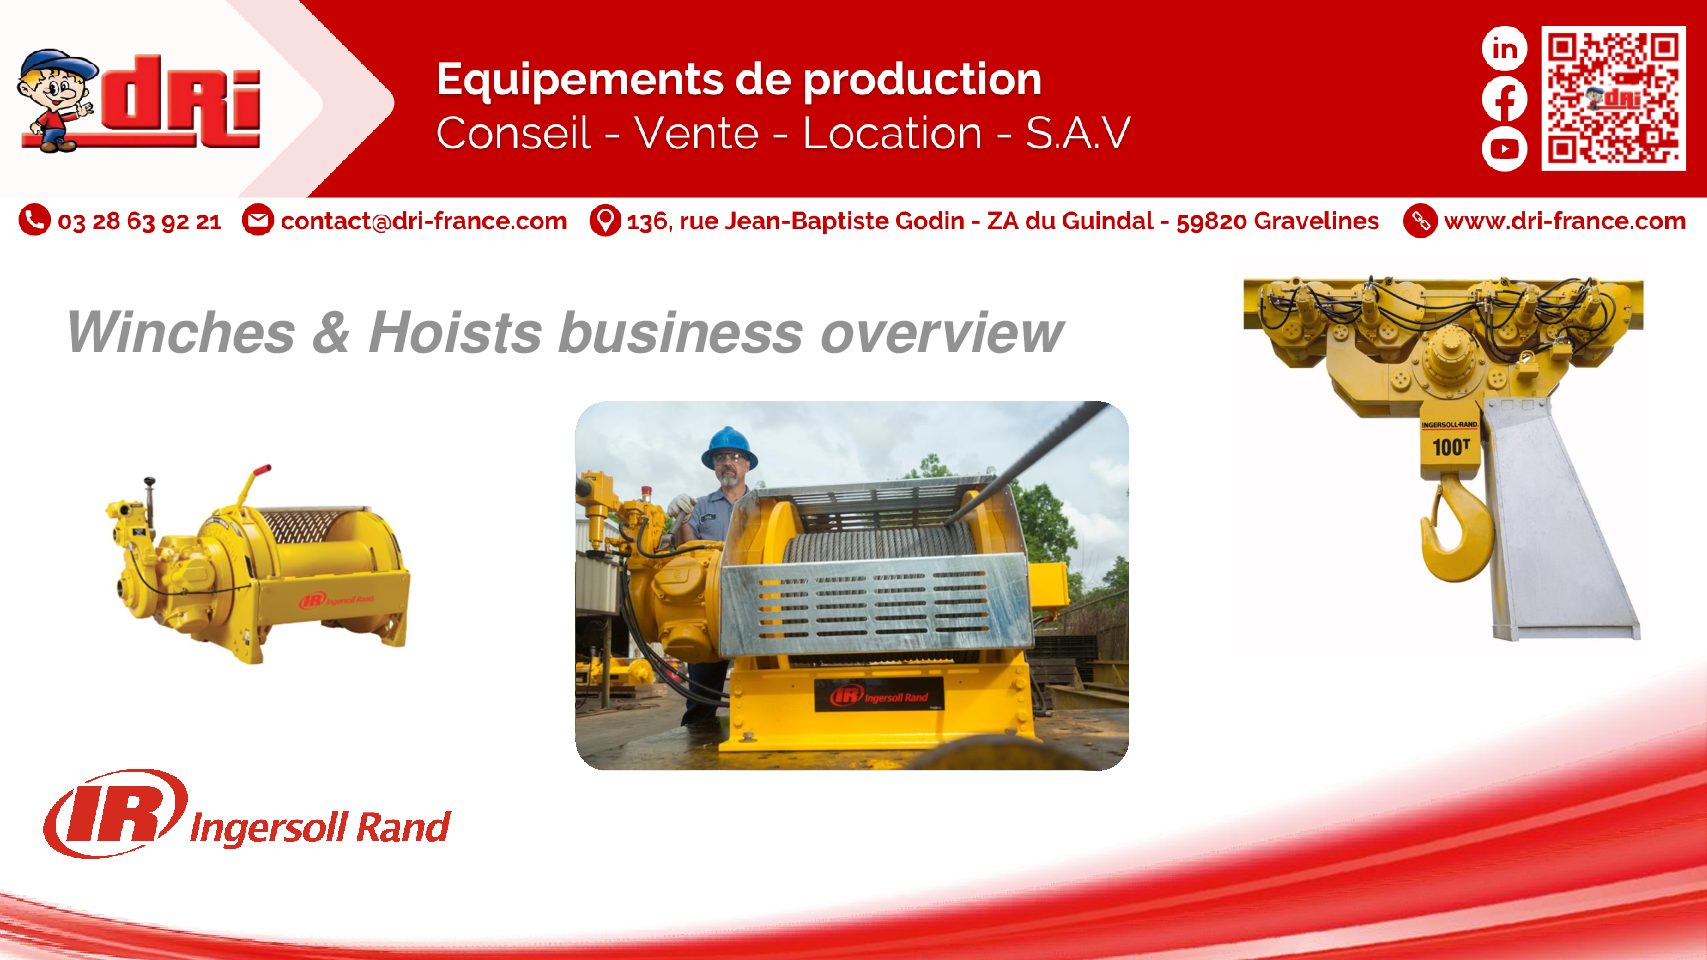 Oil and Gas - Winch and Hoist